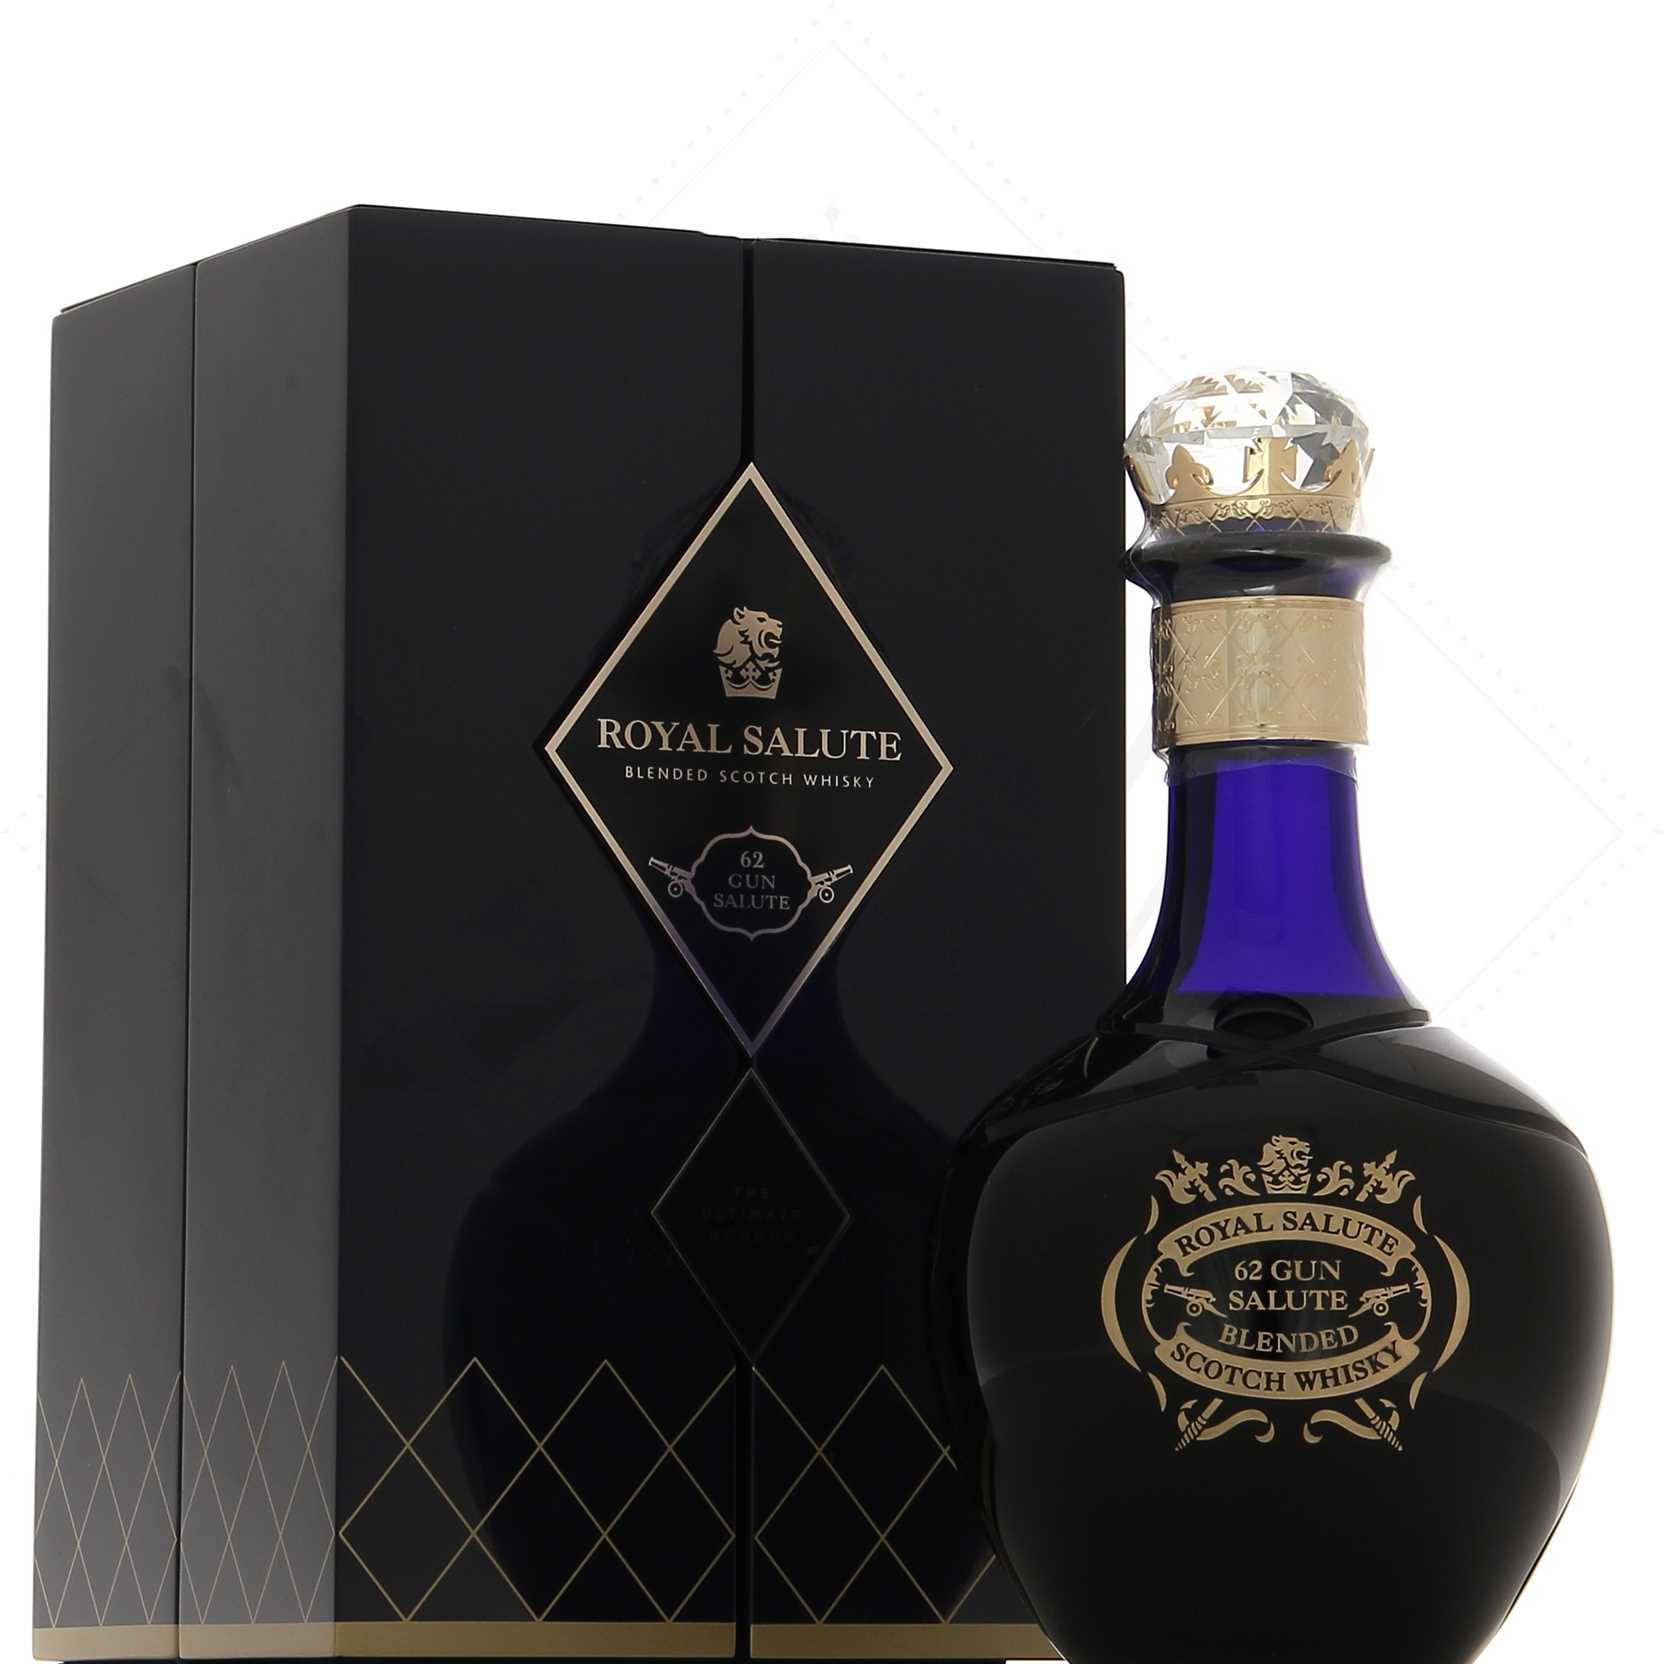 1 bouteille SCOTCH WHISKY Royal Salute, Chivas 21 year…